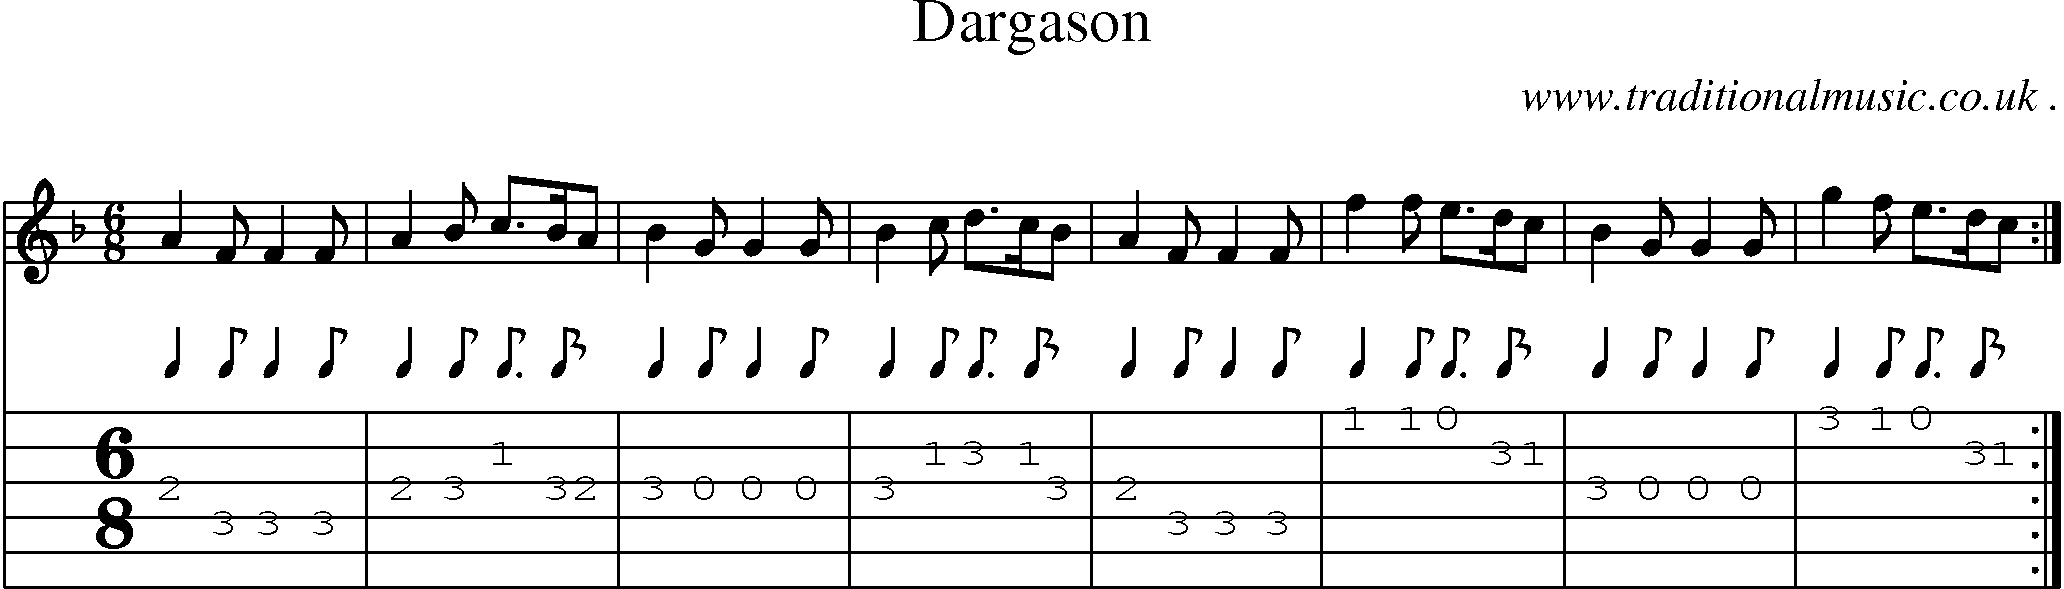 Sheet-Music and Guitar Tabs for Dargason